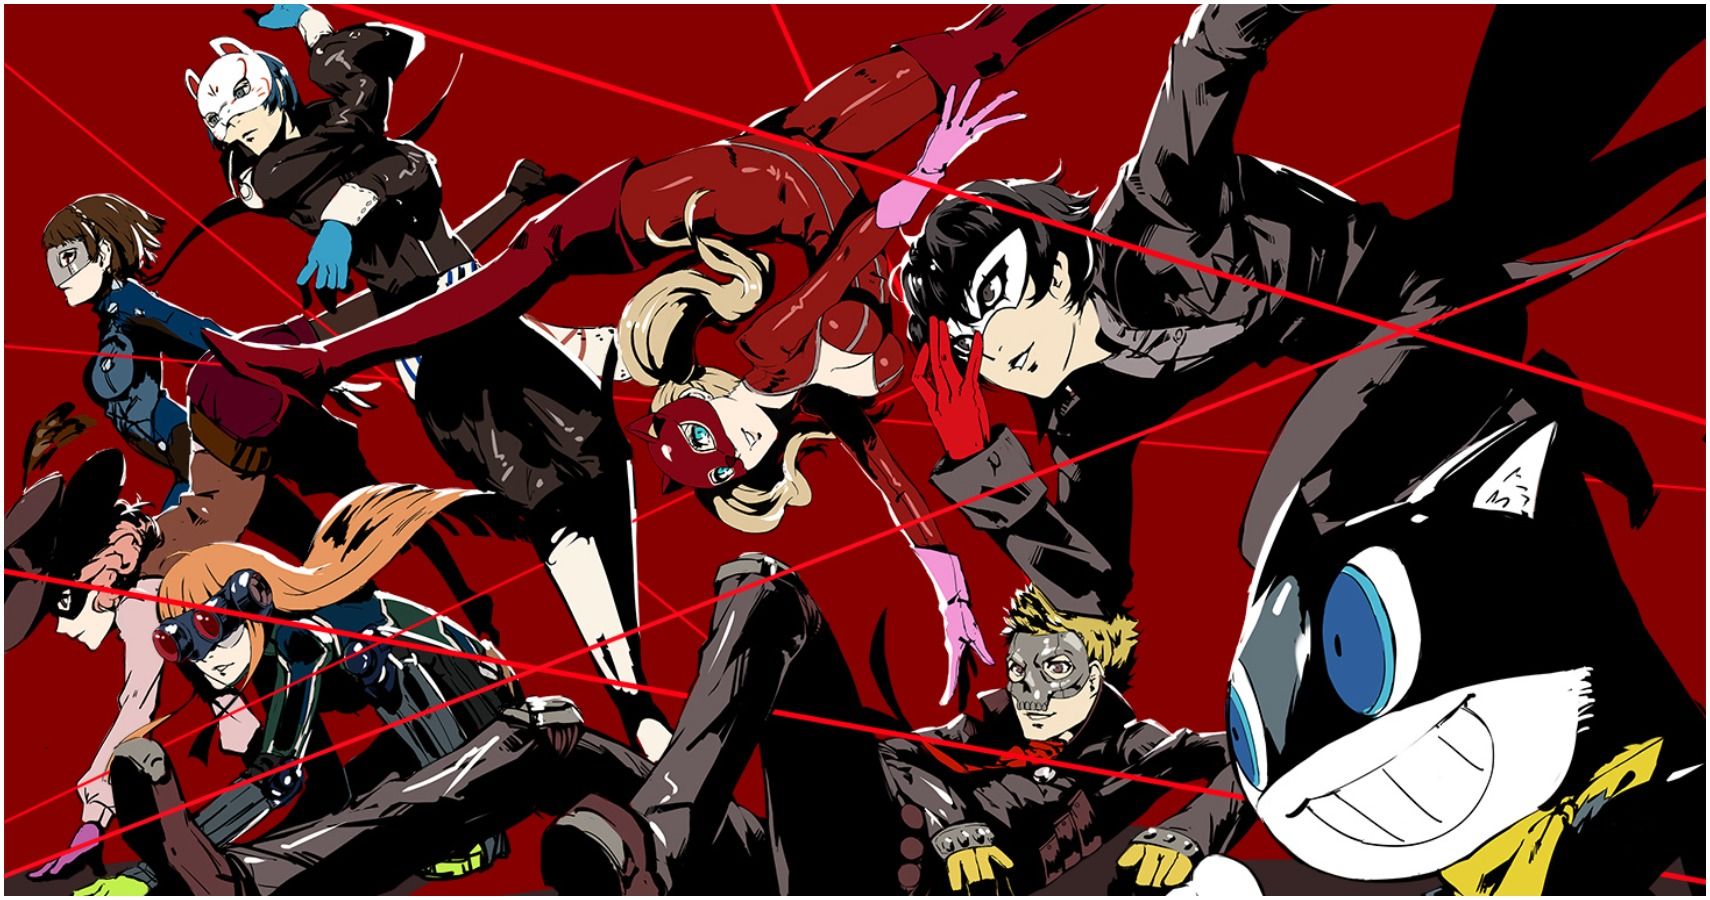 persona 5 royal ps now